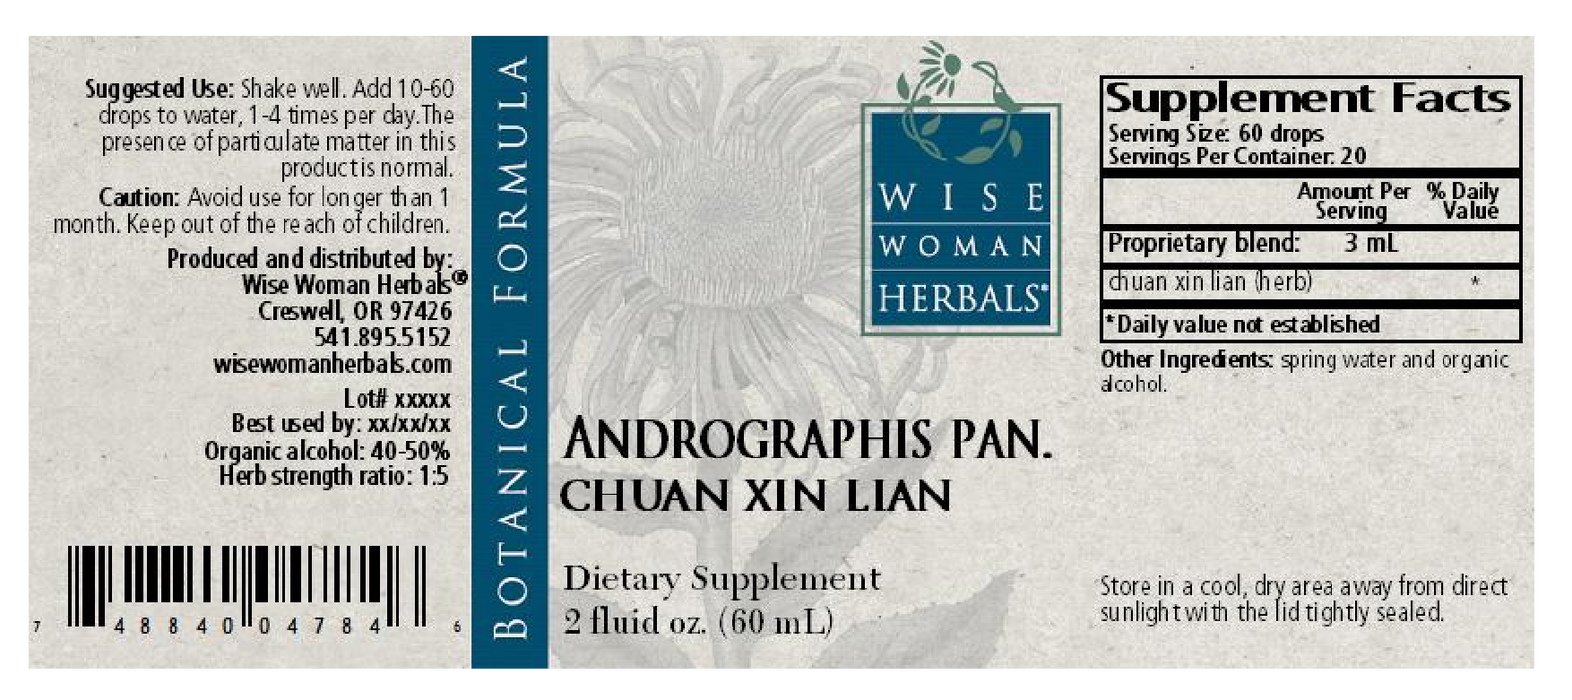 Wise Woman Herbals Andrographis/chuan xin lian 2 oz